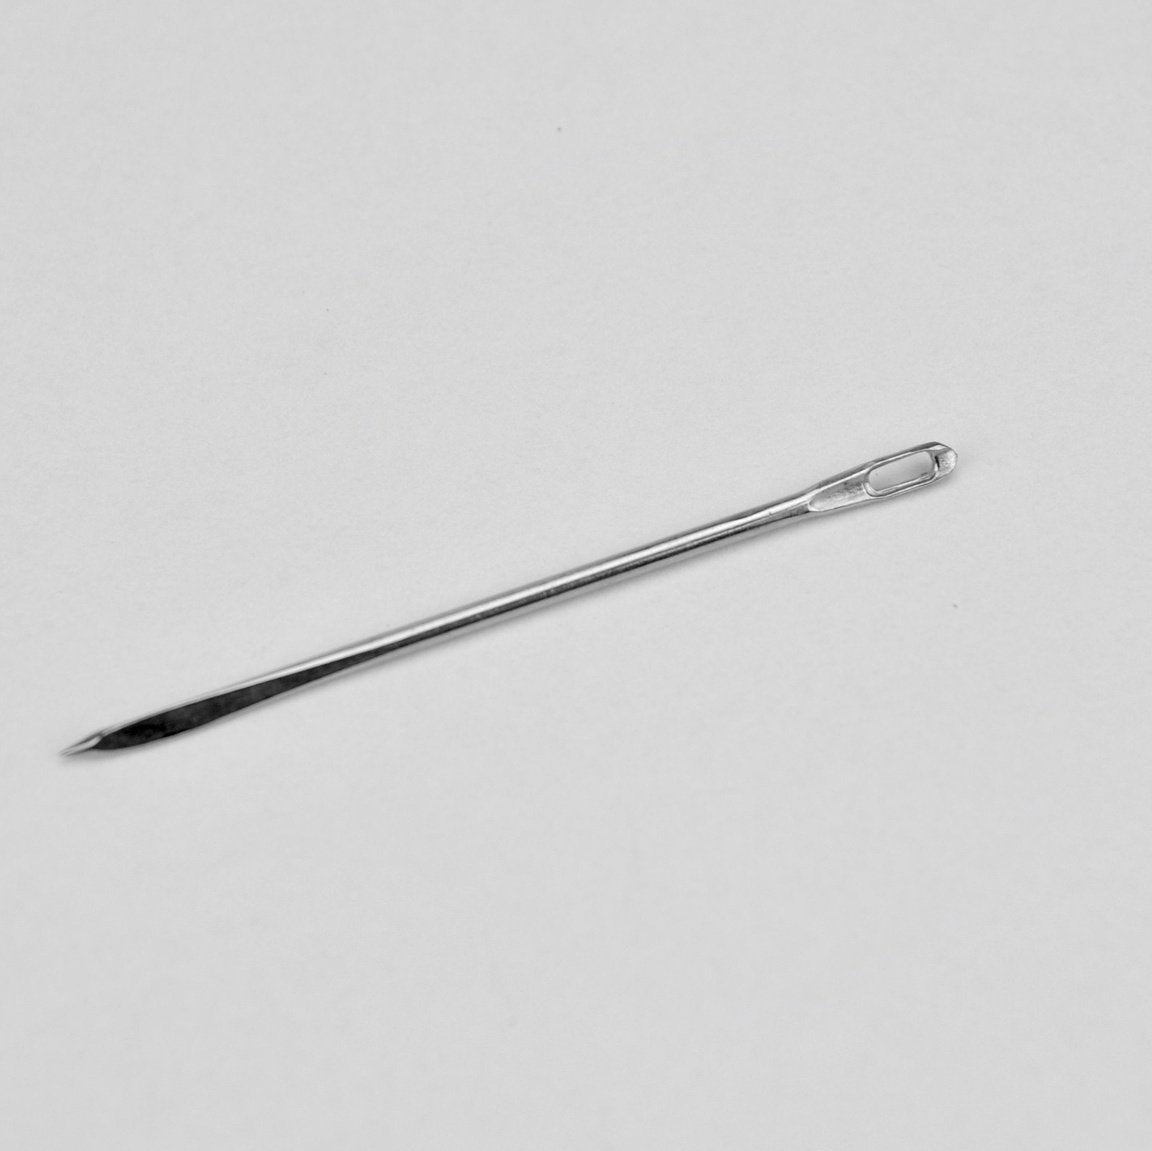 Leather needle 61 mm 2 mm thick Diamond shape point